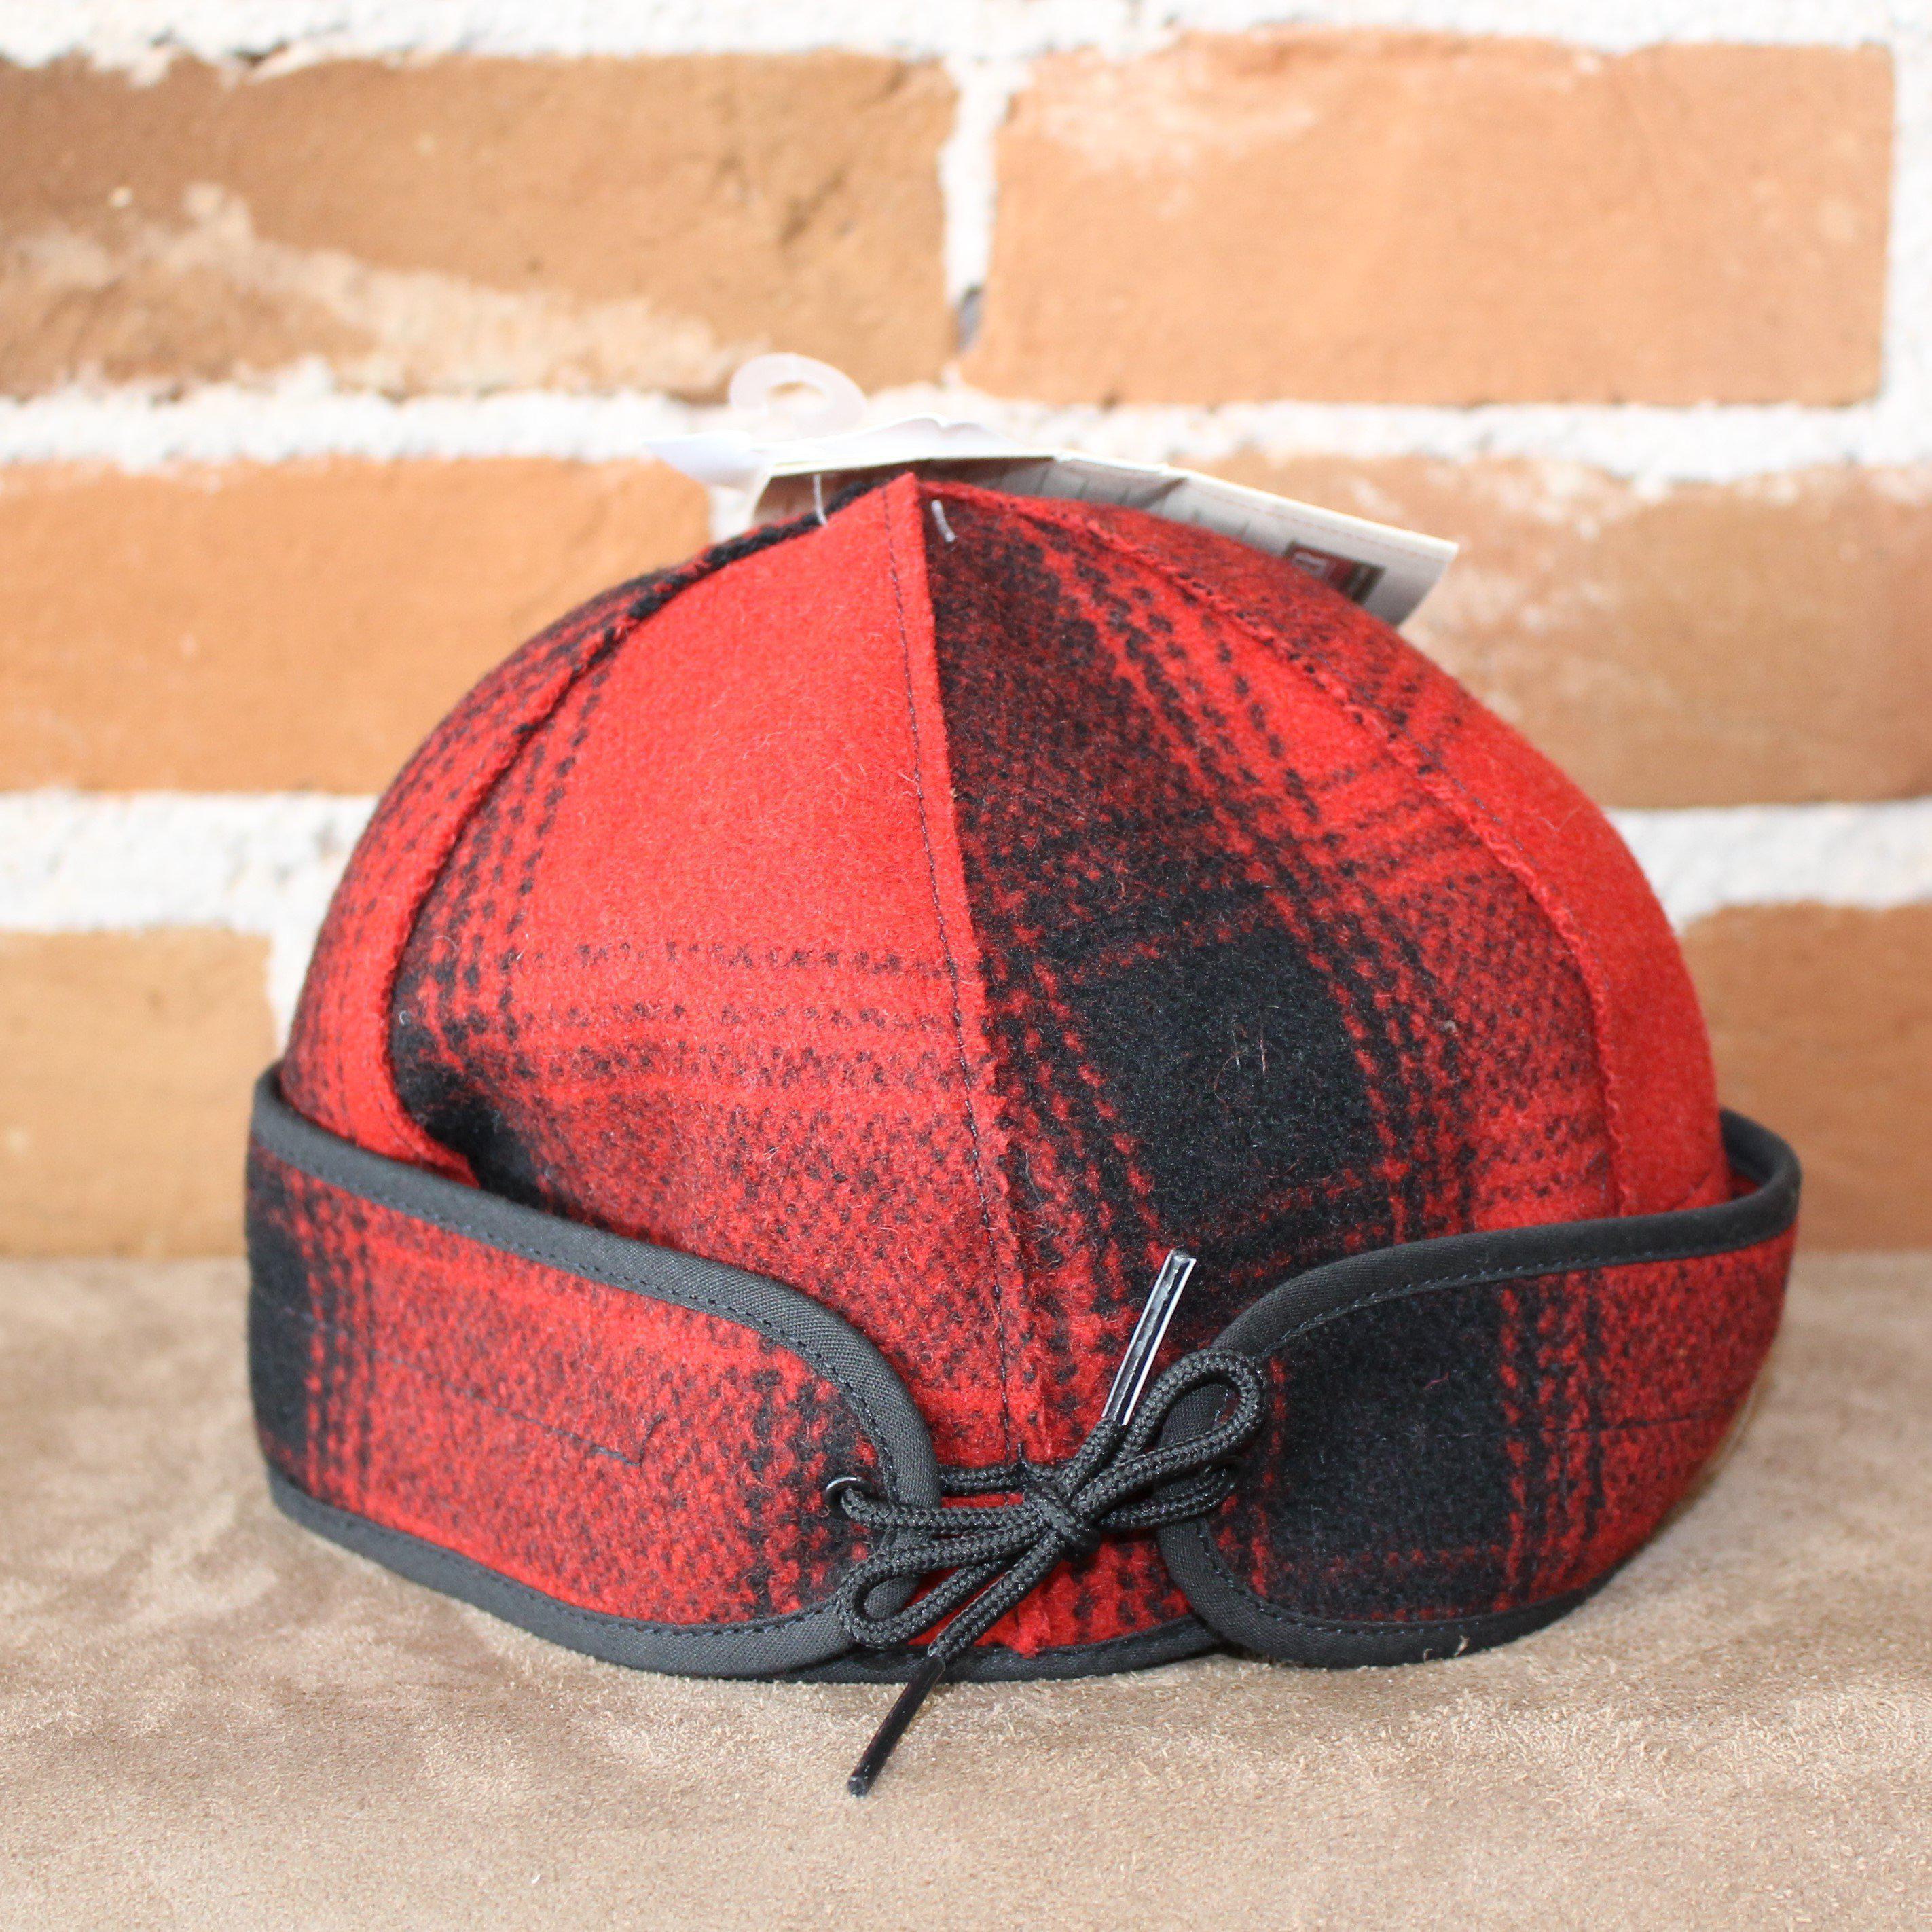 Brimless Cap In Red And Black Plaid-Atomic 79